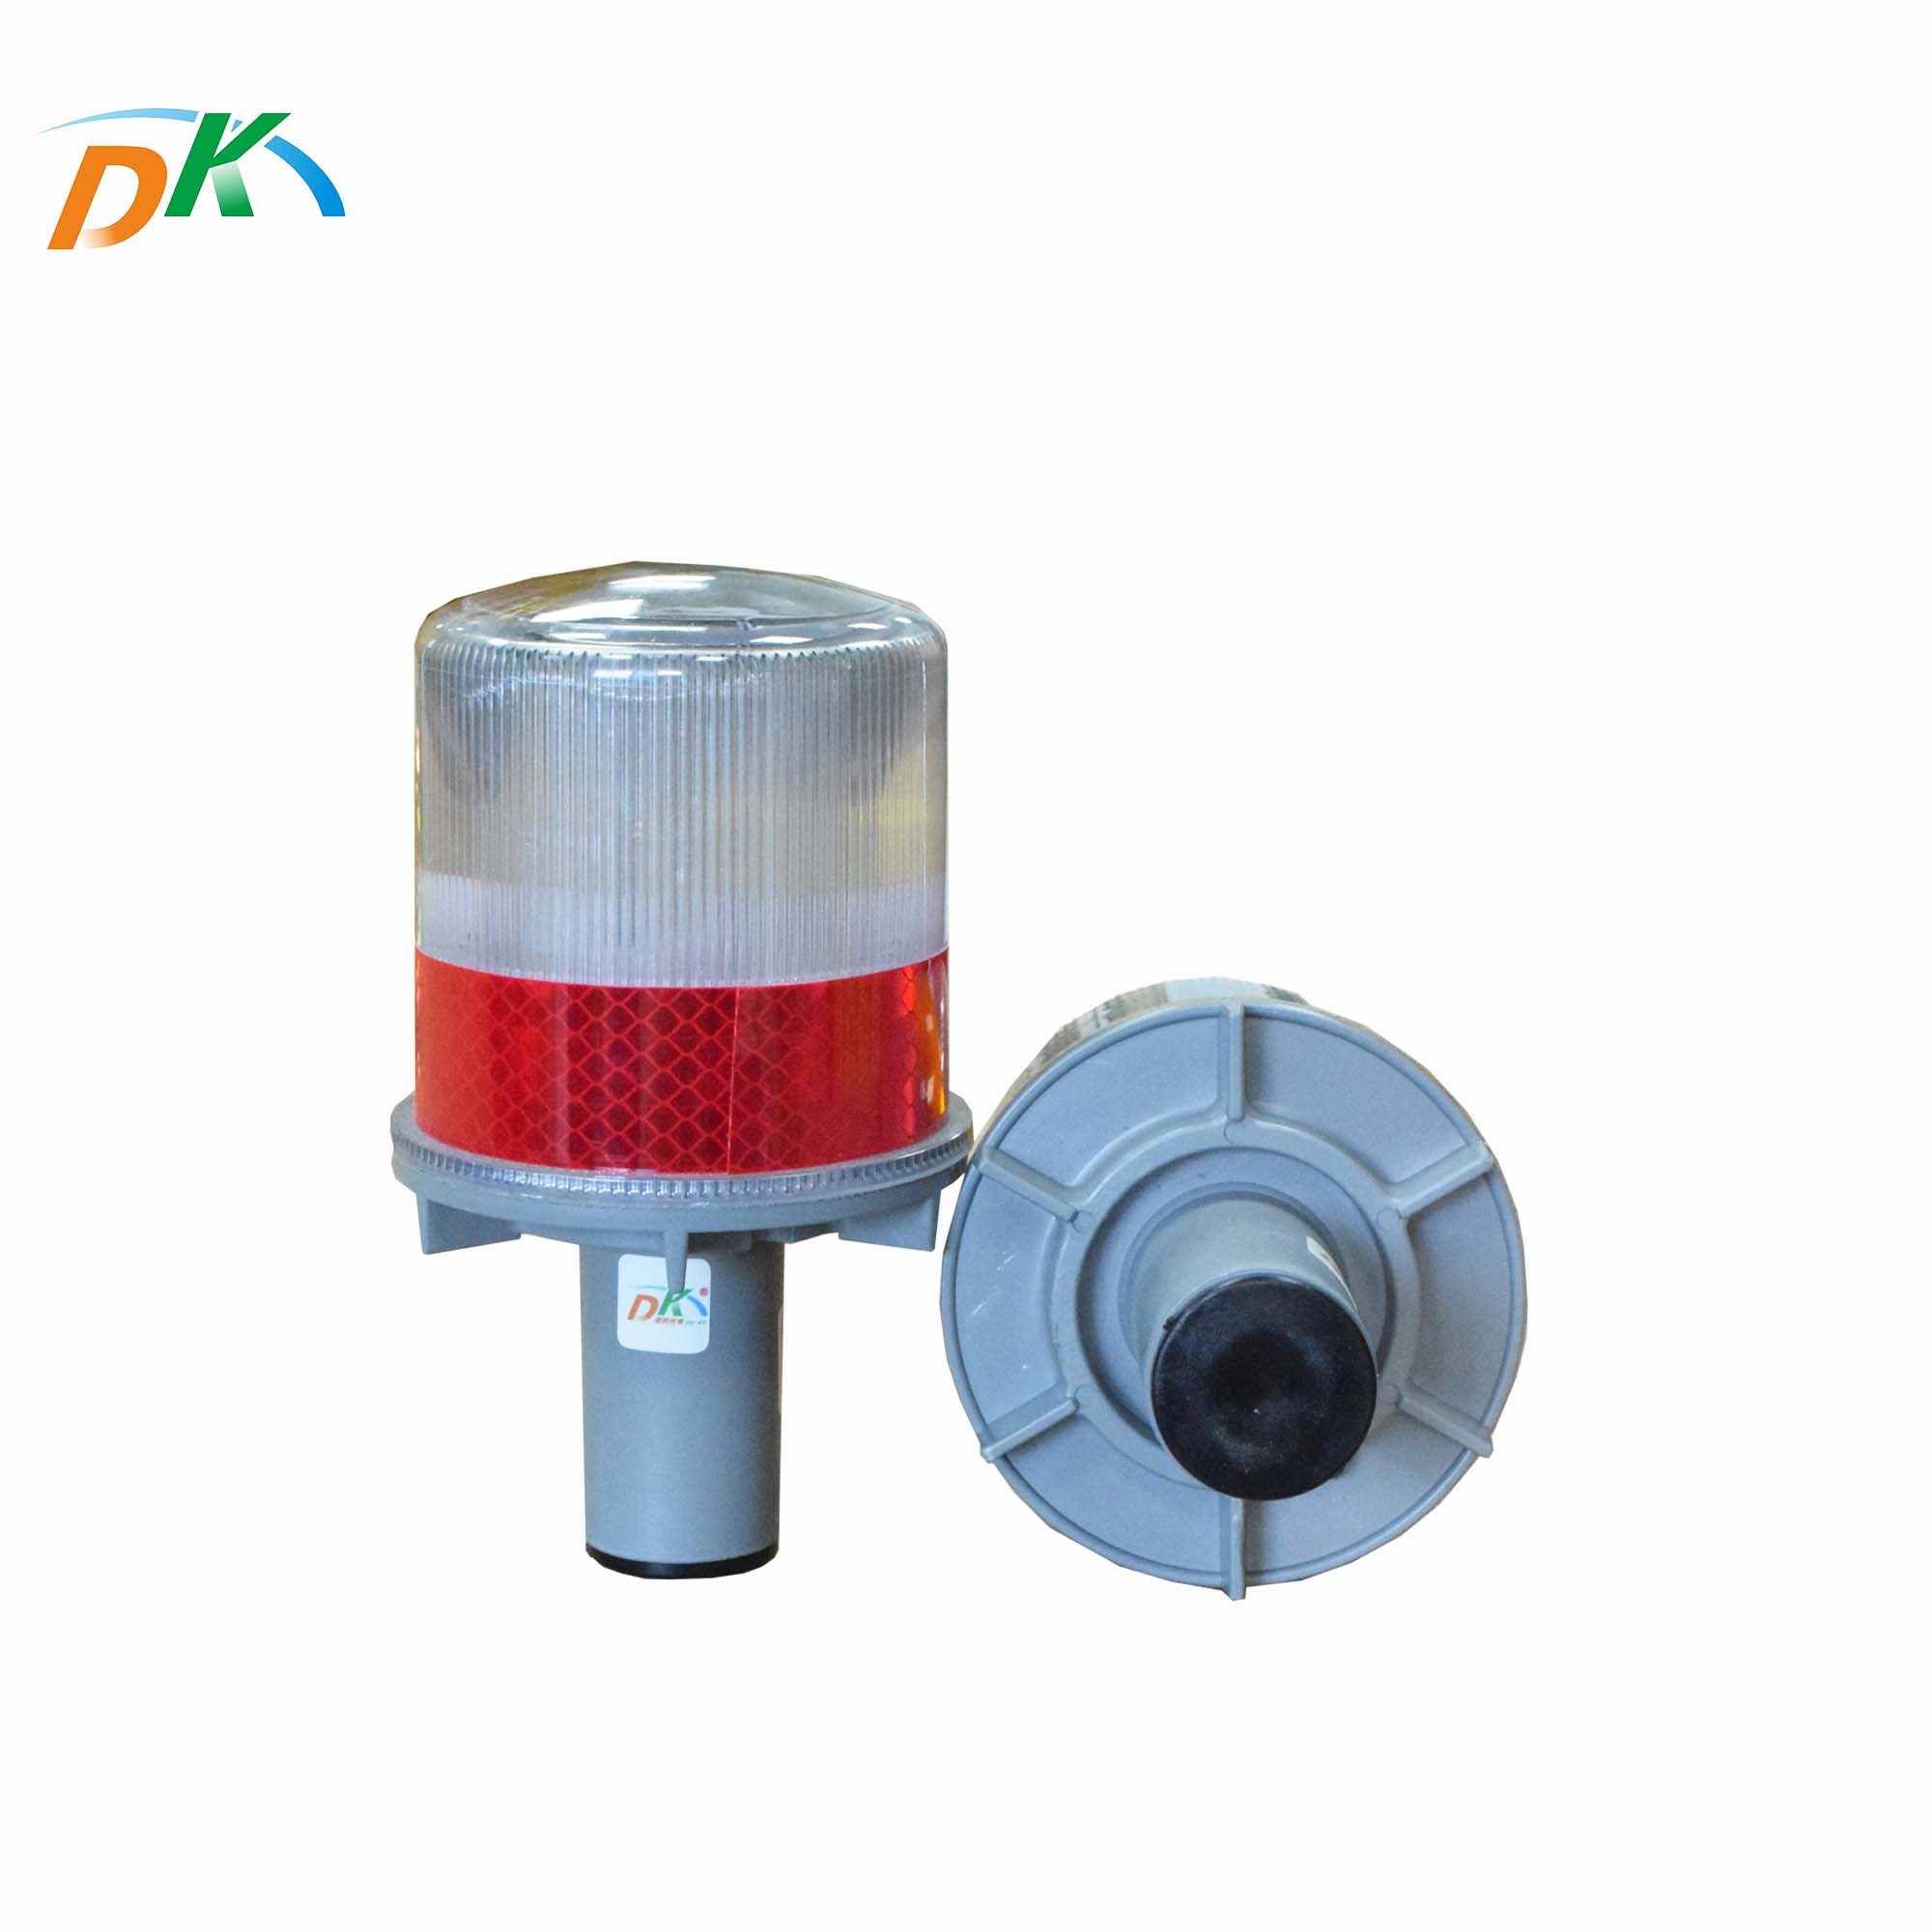 DK LED traffic cone solar flare warning light for roadway safety